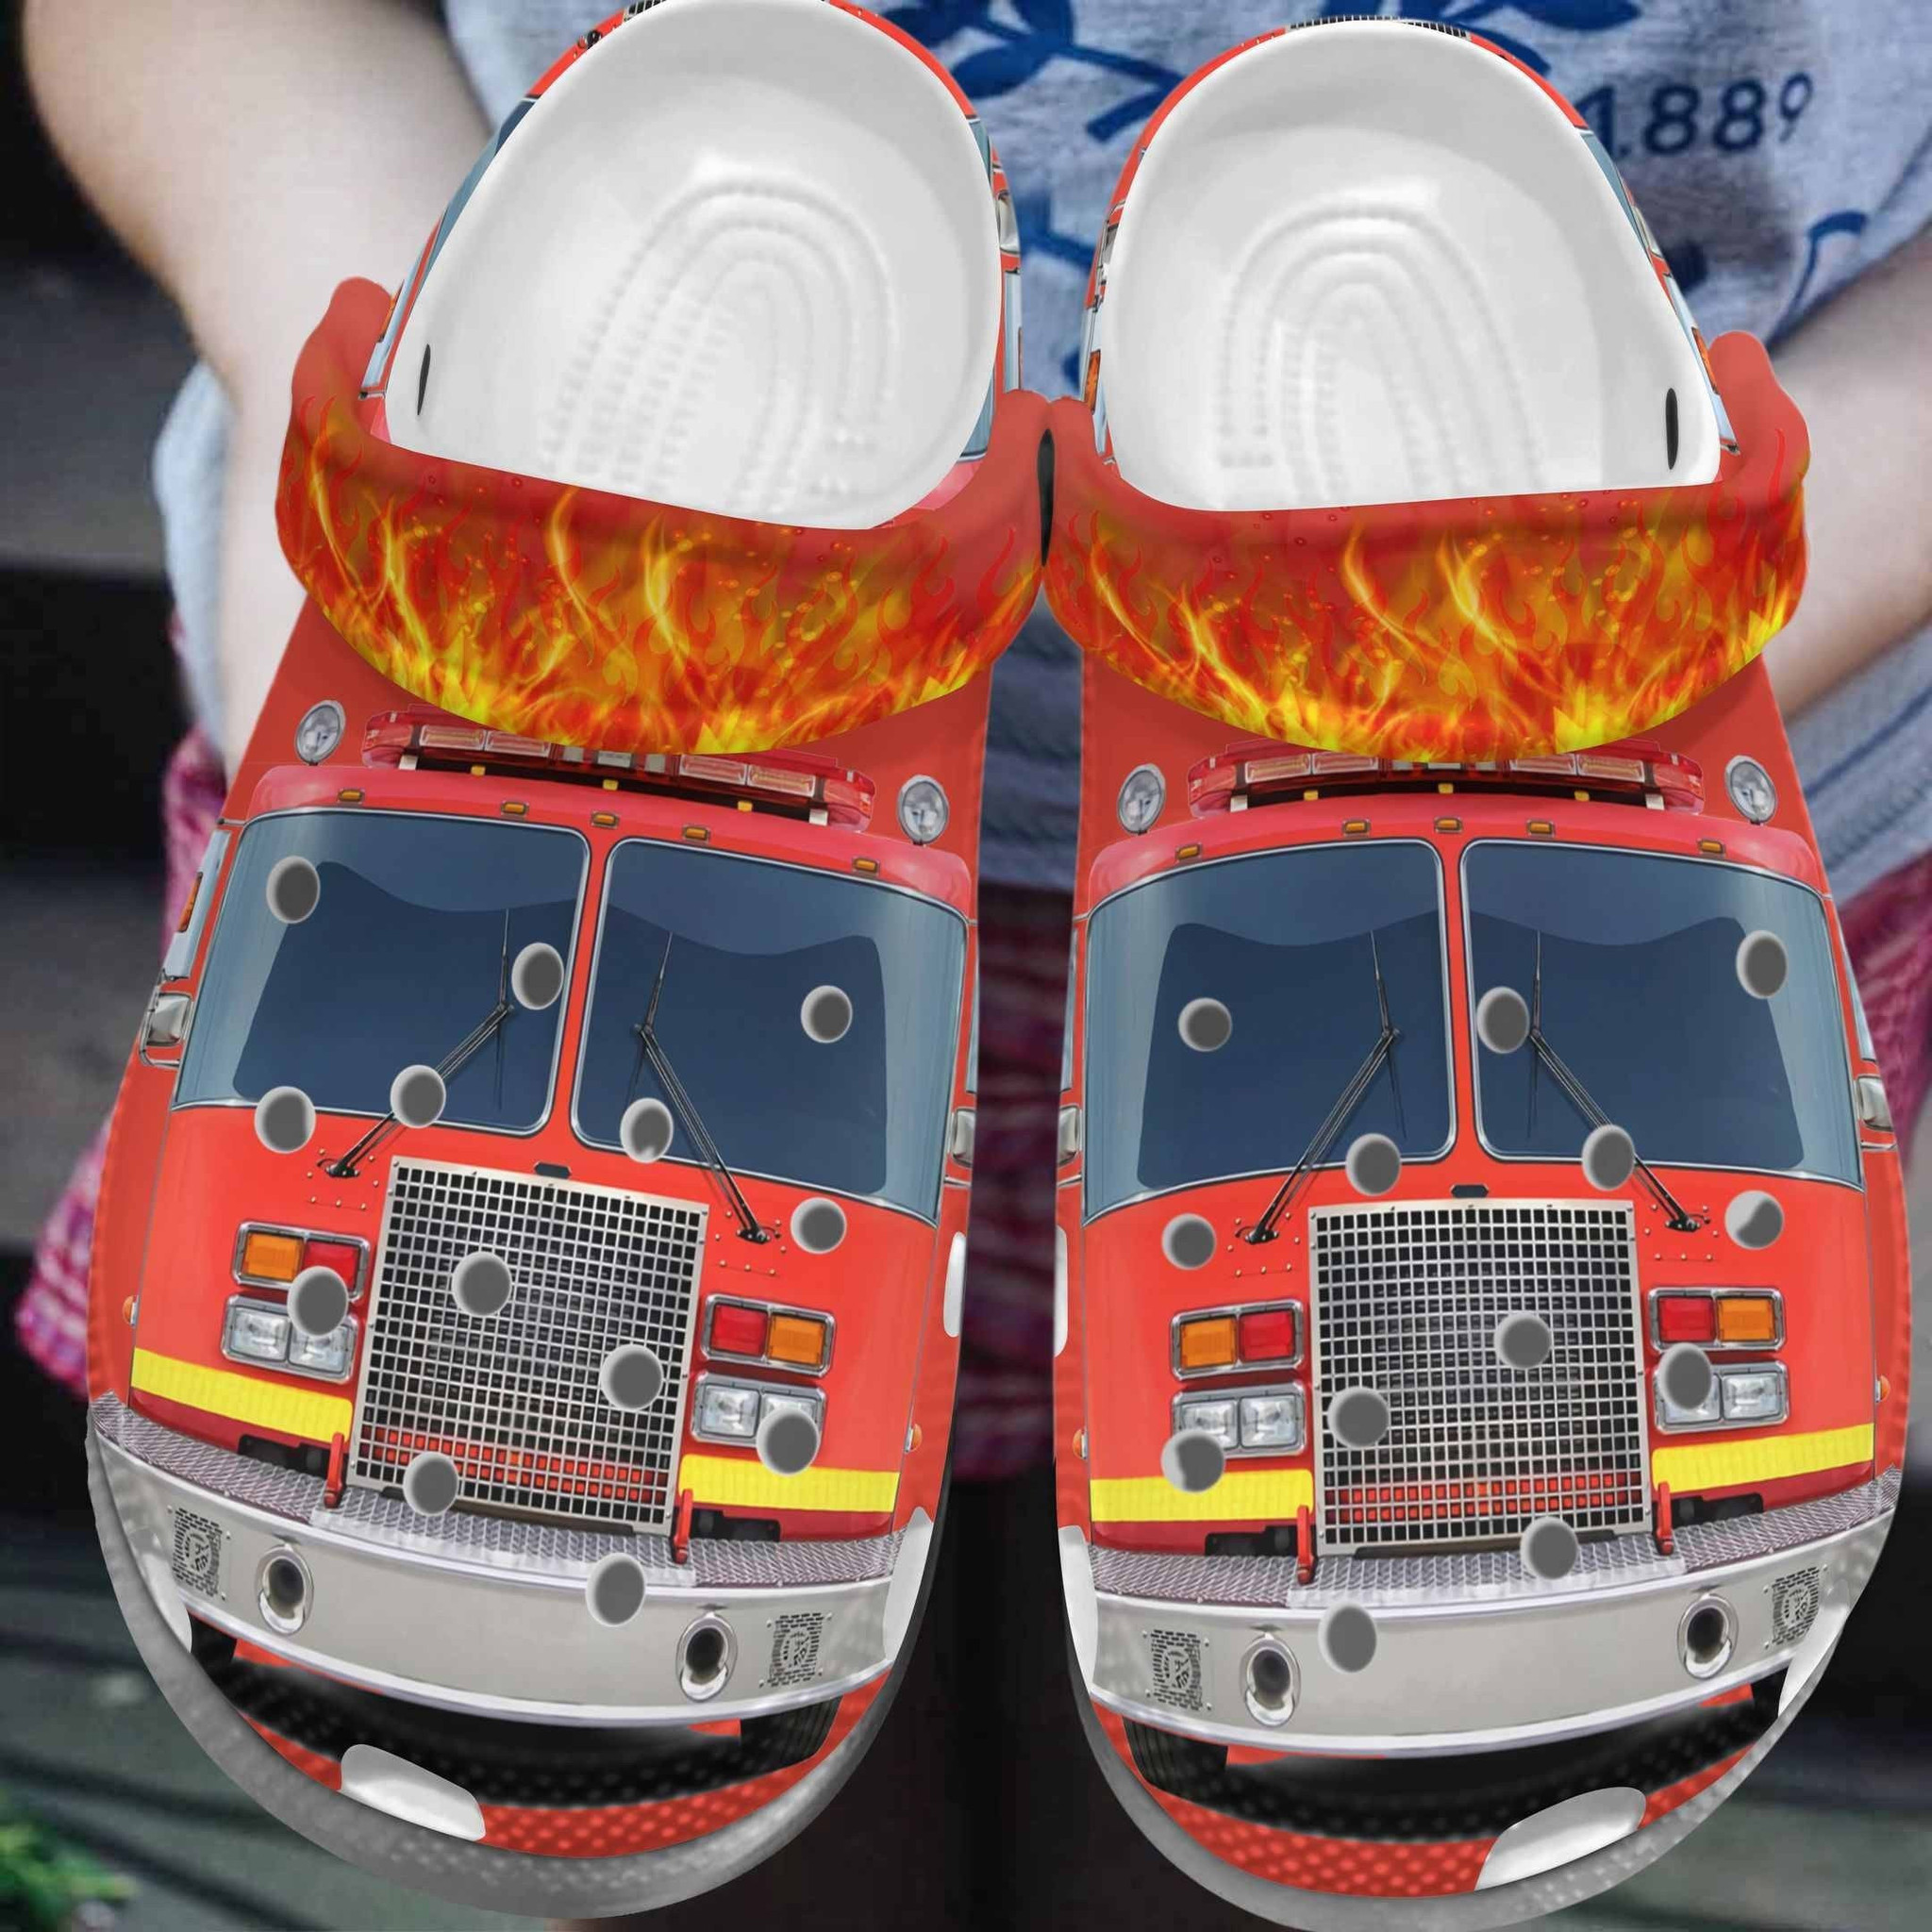 Big Fire Truck Fan Croc Crocs Shoes Men Women - Vehicle Firefighter Clog Gifts For Father Day